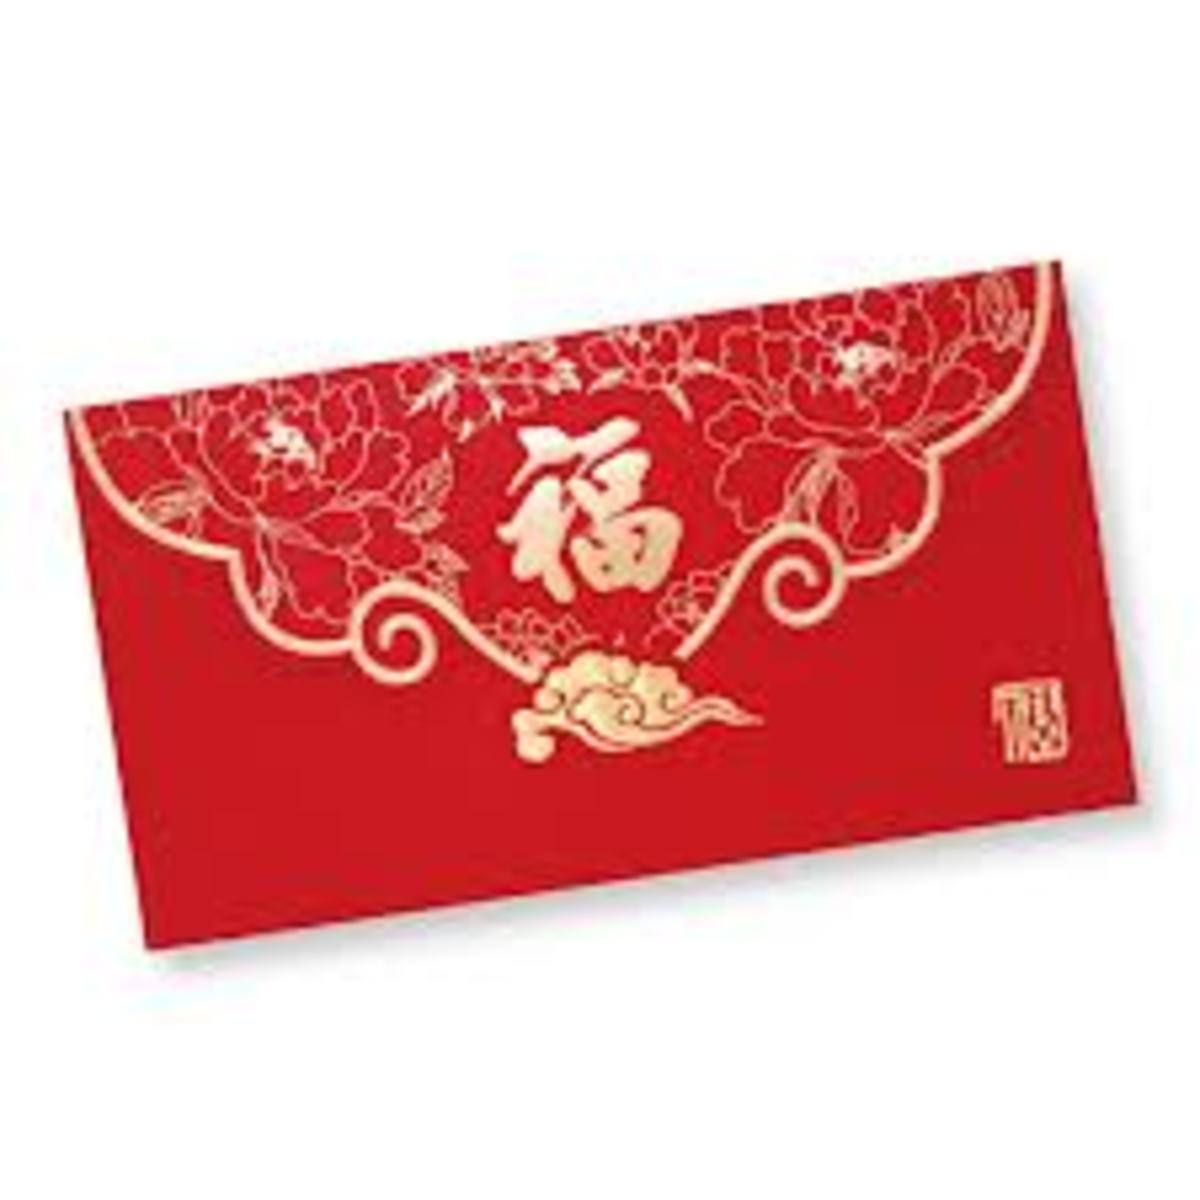 chinese-lunar-new-year